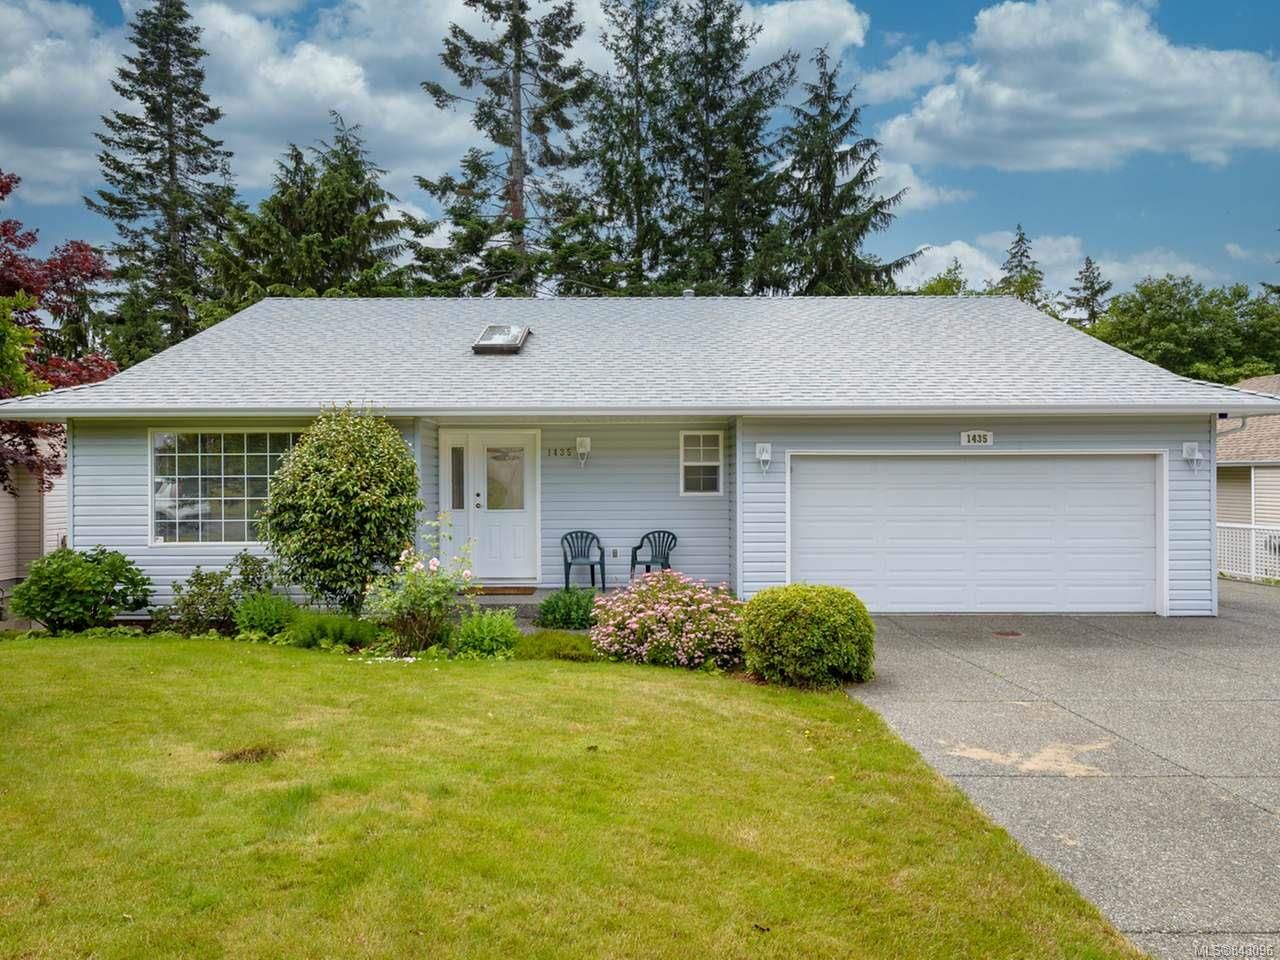 Main Photo: 1435 Sitka Ave in COURTENAY: CV Courtenay East House for sale (Comox Valley)  : MLS®# 843096